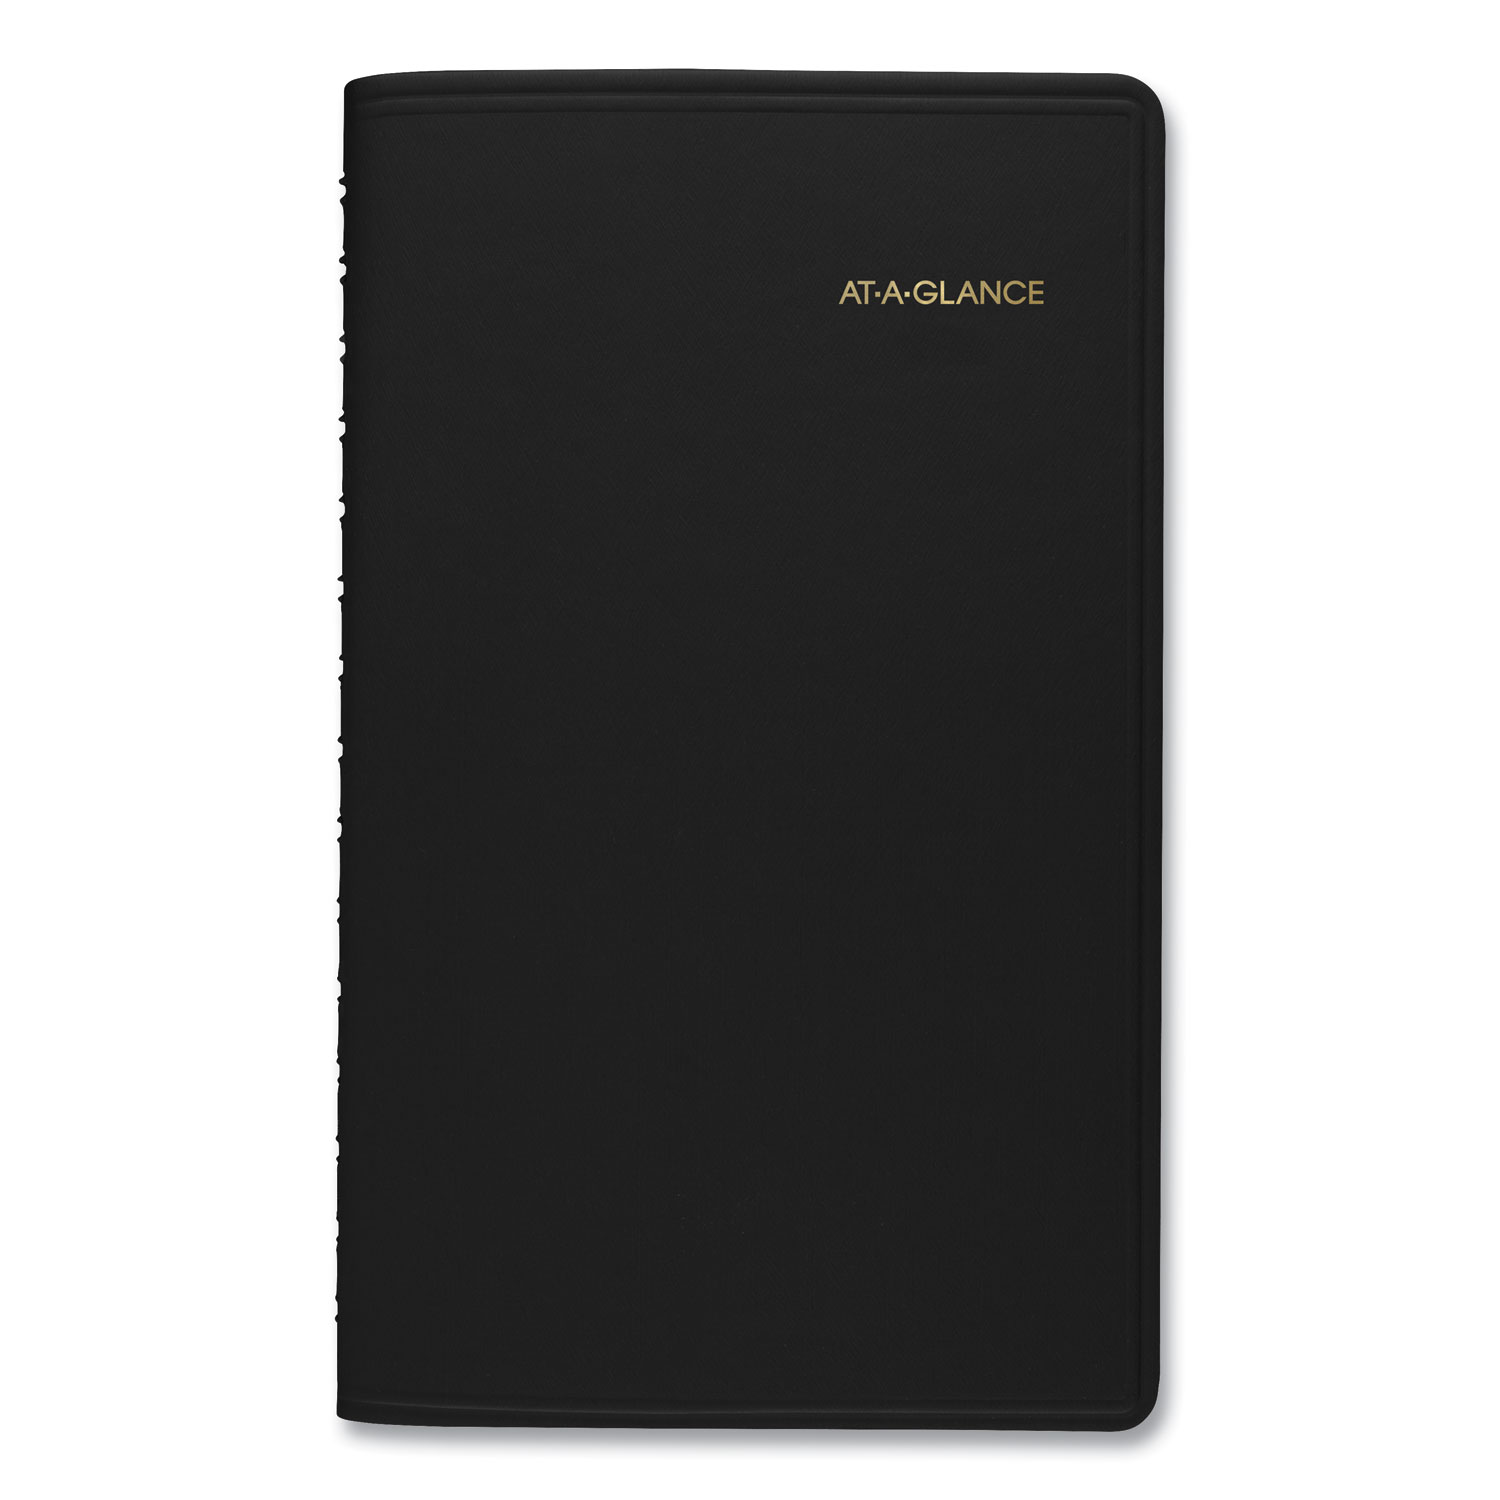  AT-A-GLANCE 7007505 Weekly Appointment Book Ruled for Hourly Appointments, 8 x 4 7/8, Black, 2020 (AAG7007505) 